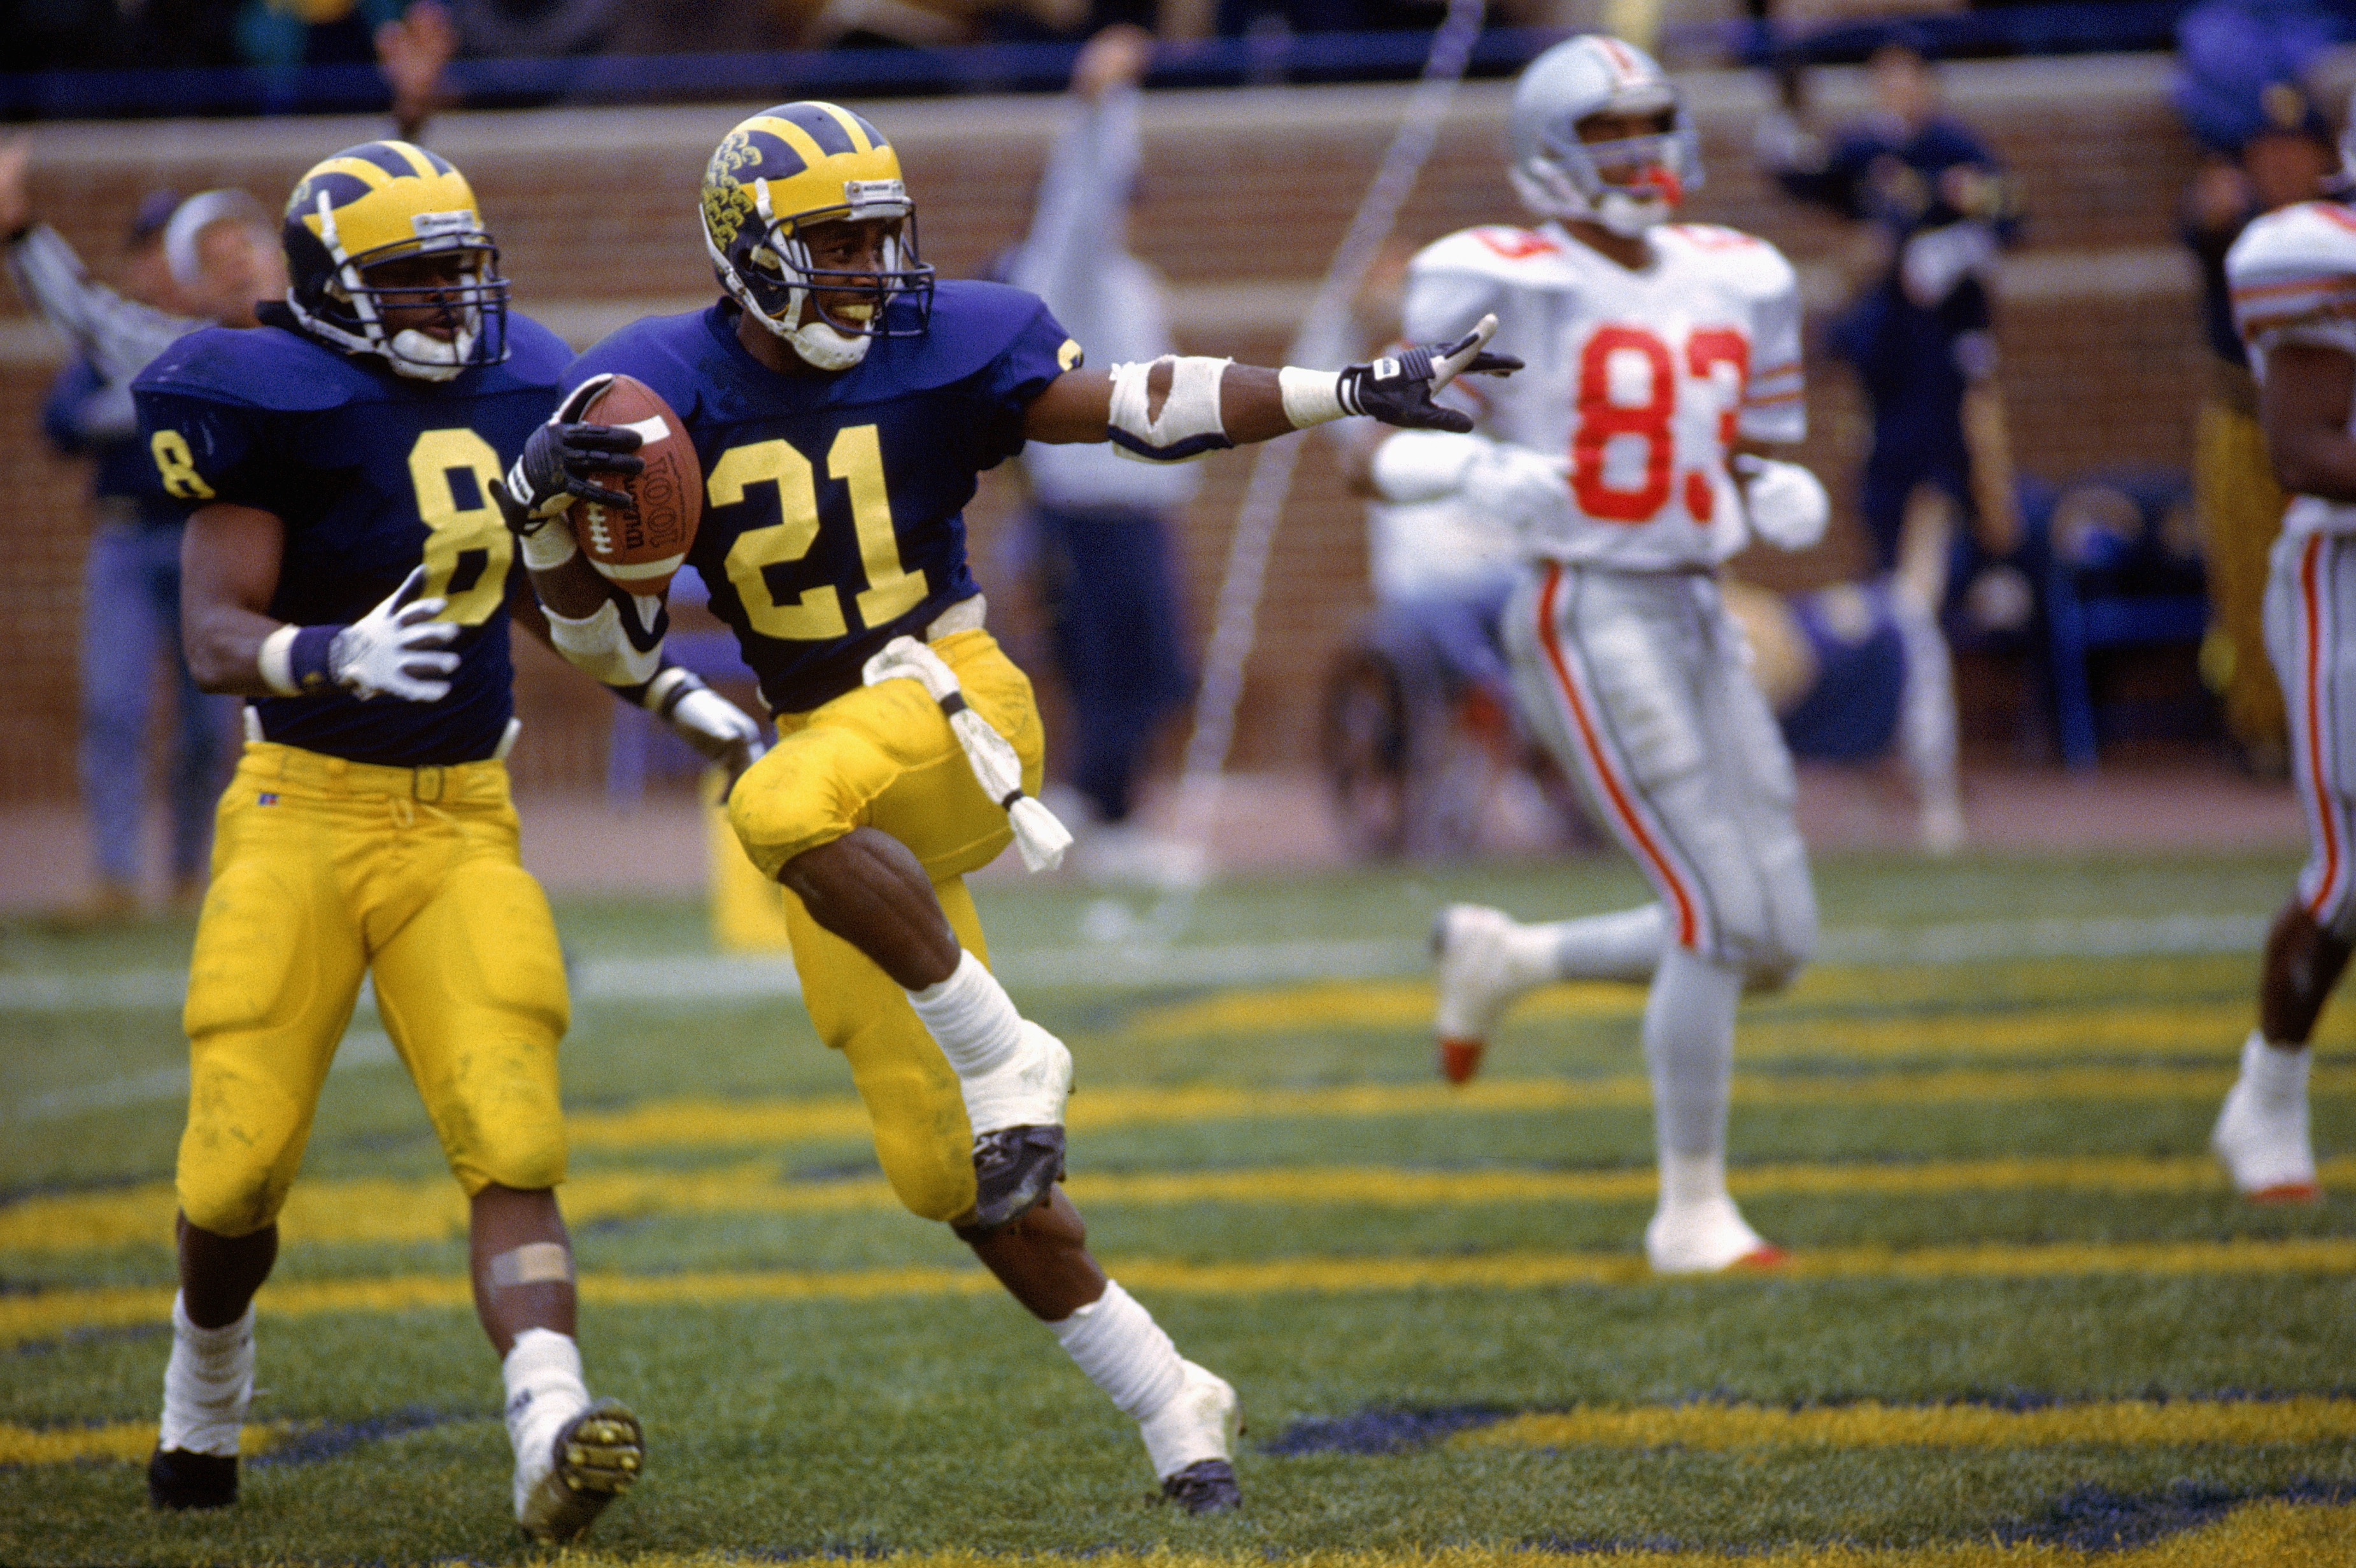 1991:  Desmond Howard #21 of the Michigan Wolverines runs makes the 'Heisman' pose right after making a 93 yard touchdown against Ohio State circa 1991 in Ann Arbor, Michigan.  Wolverines won 31 -3. (Photo by Getty Images)